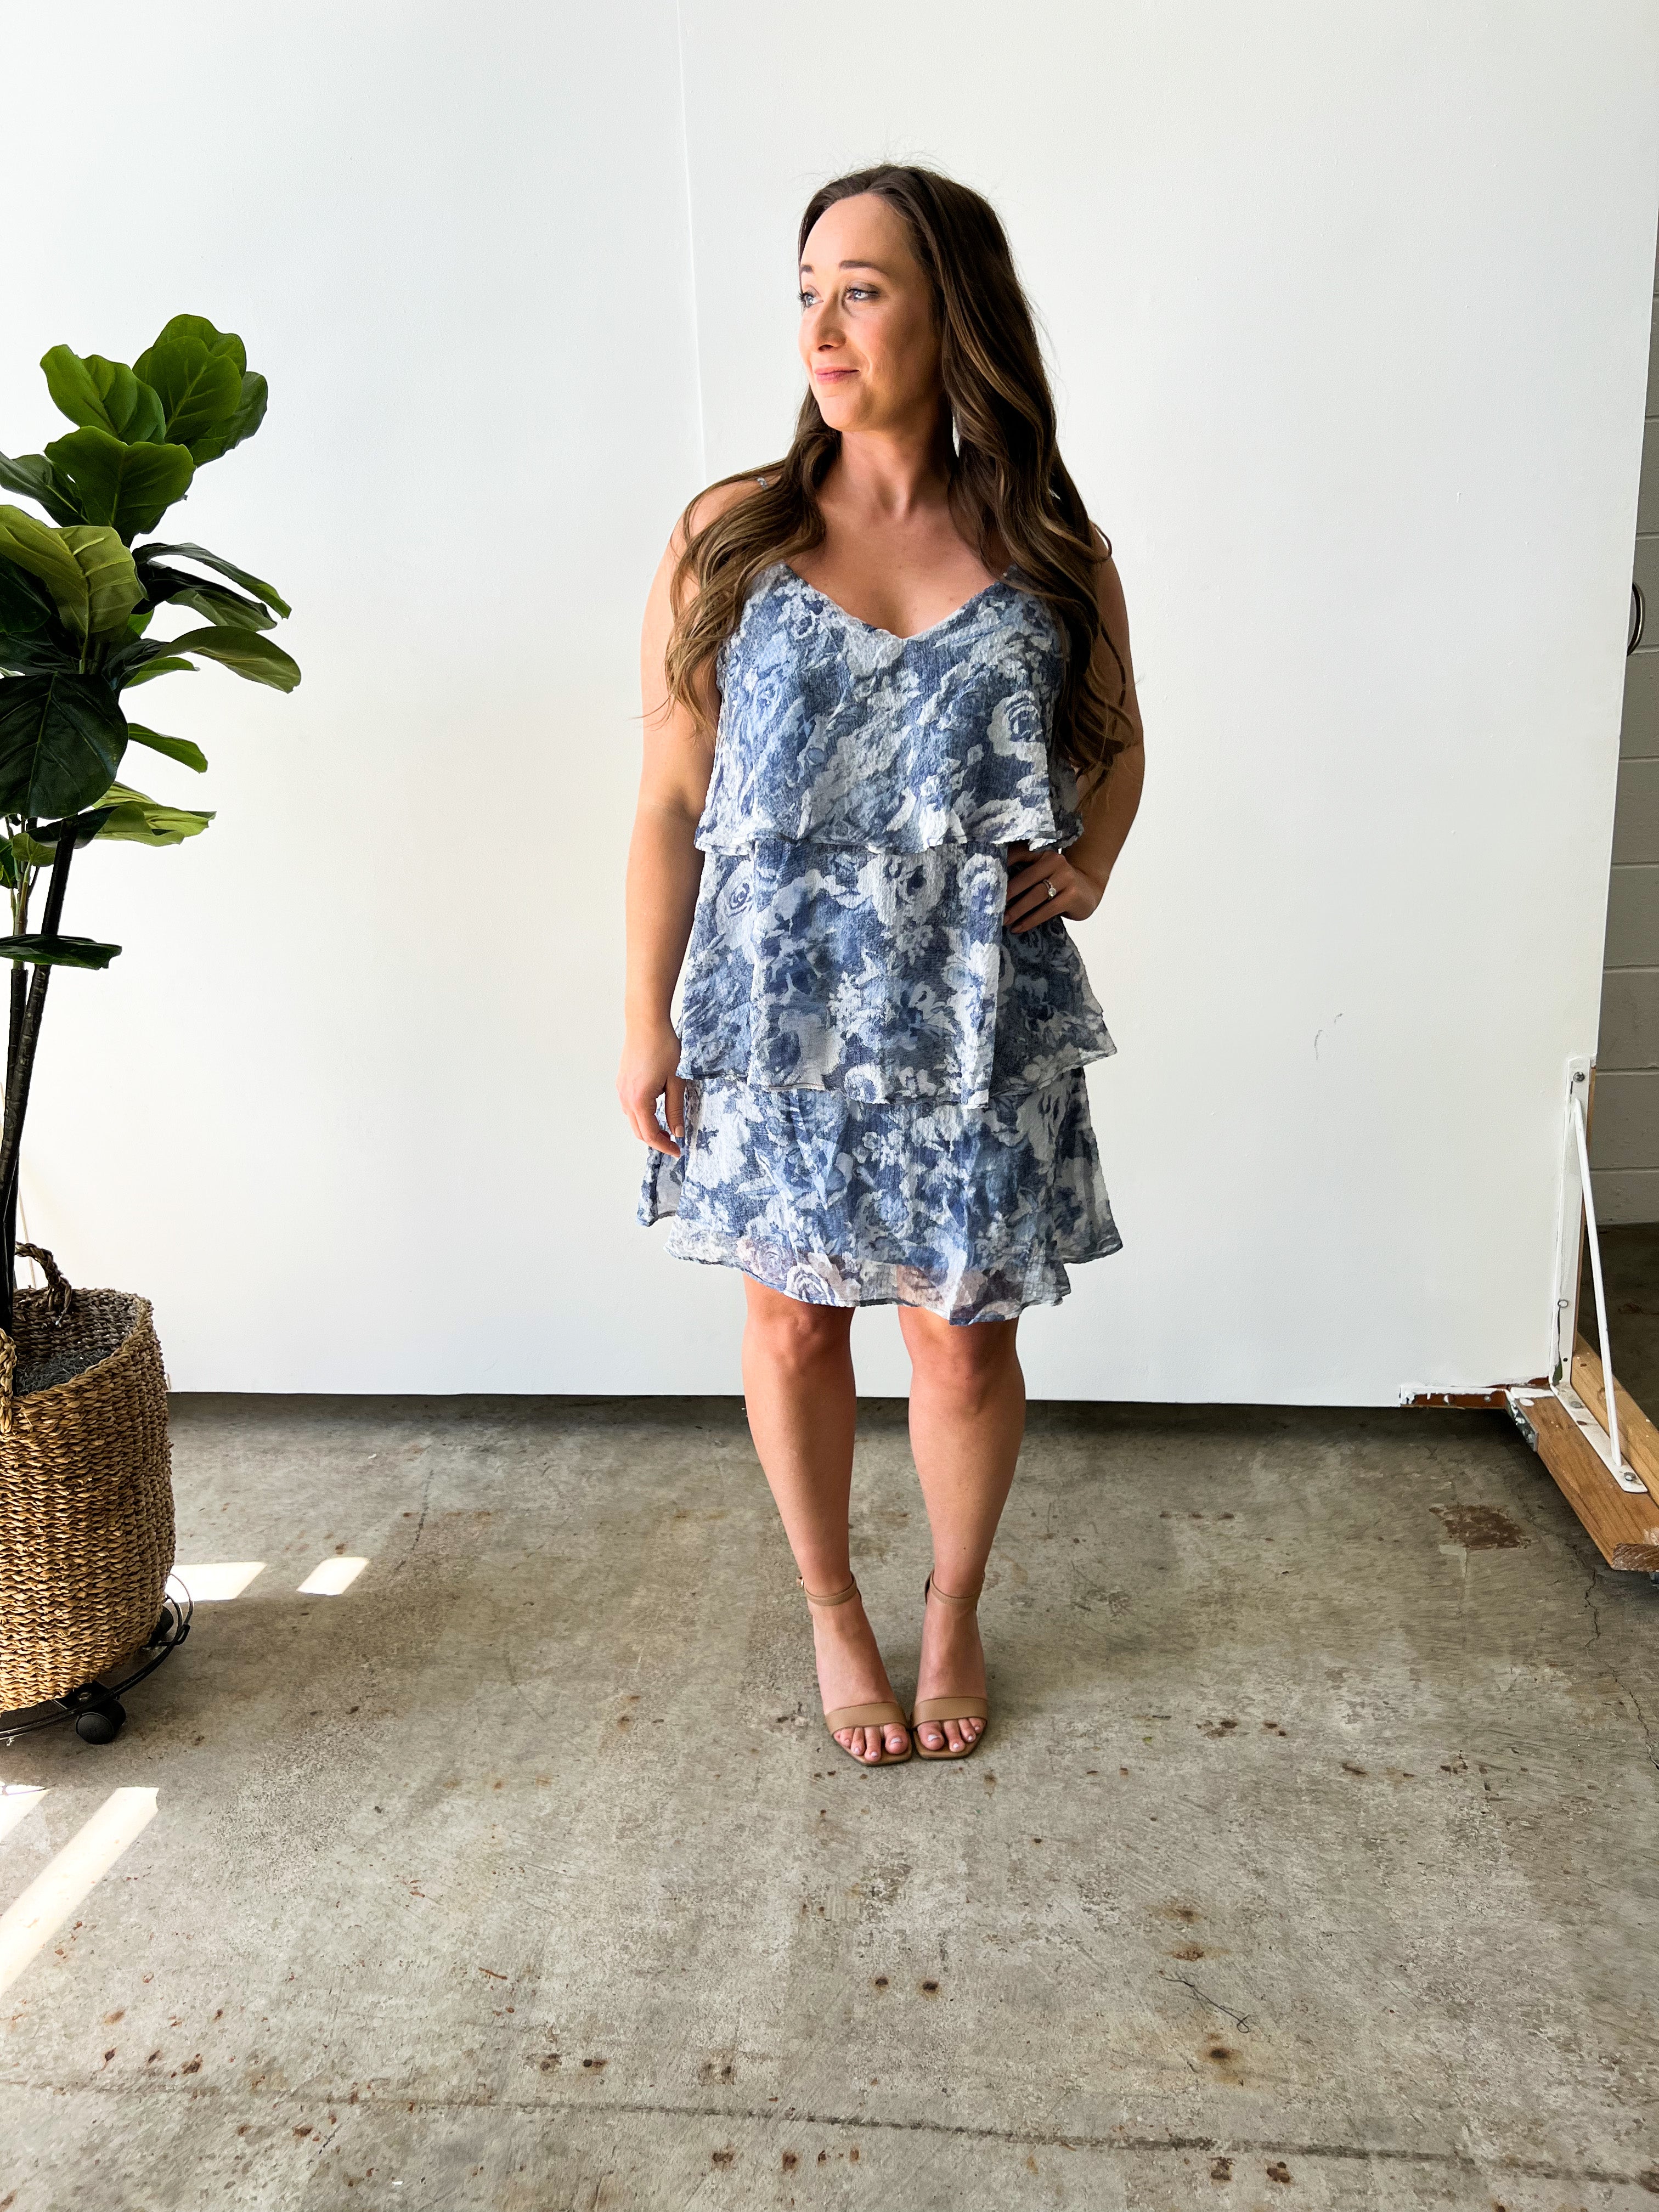 Blue Floral Tiered Dress